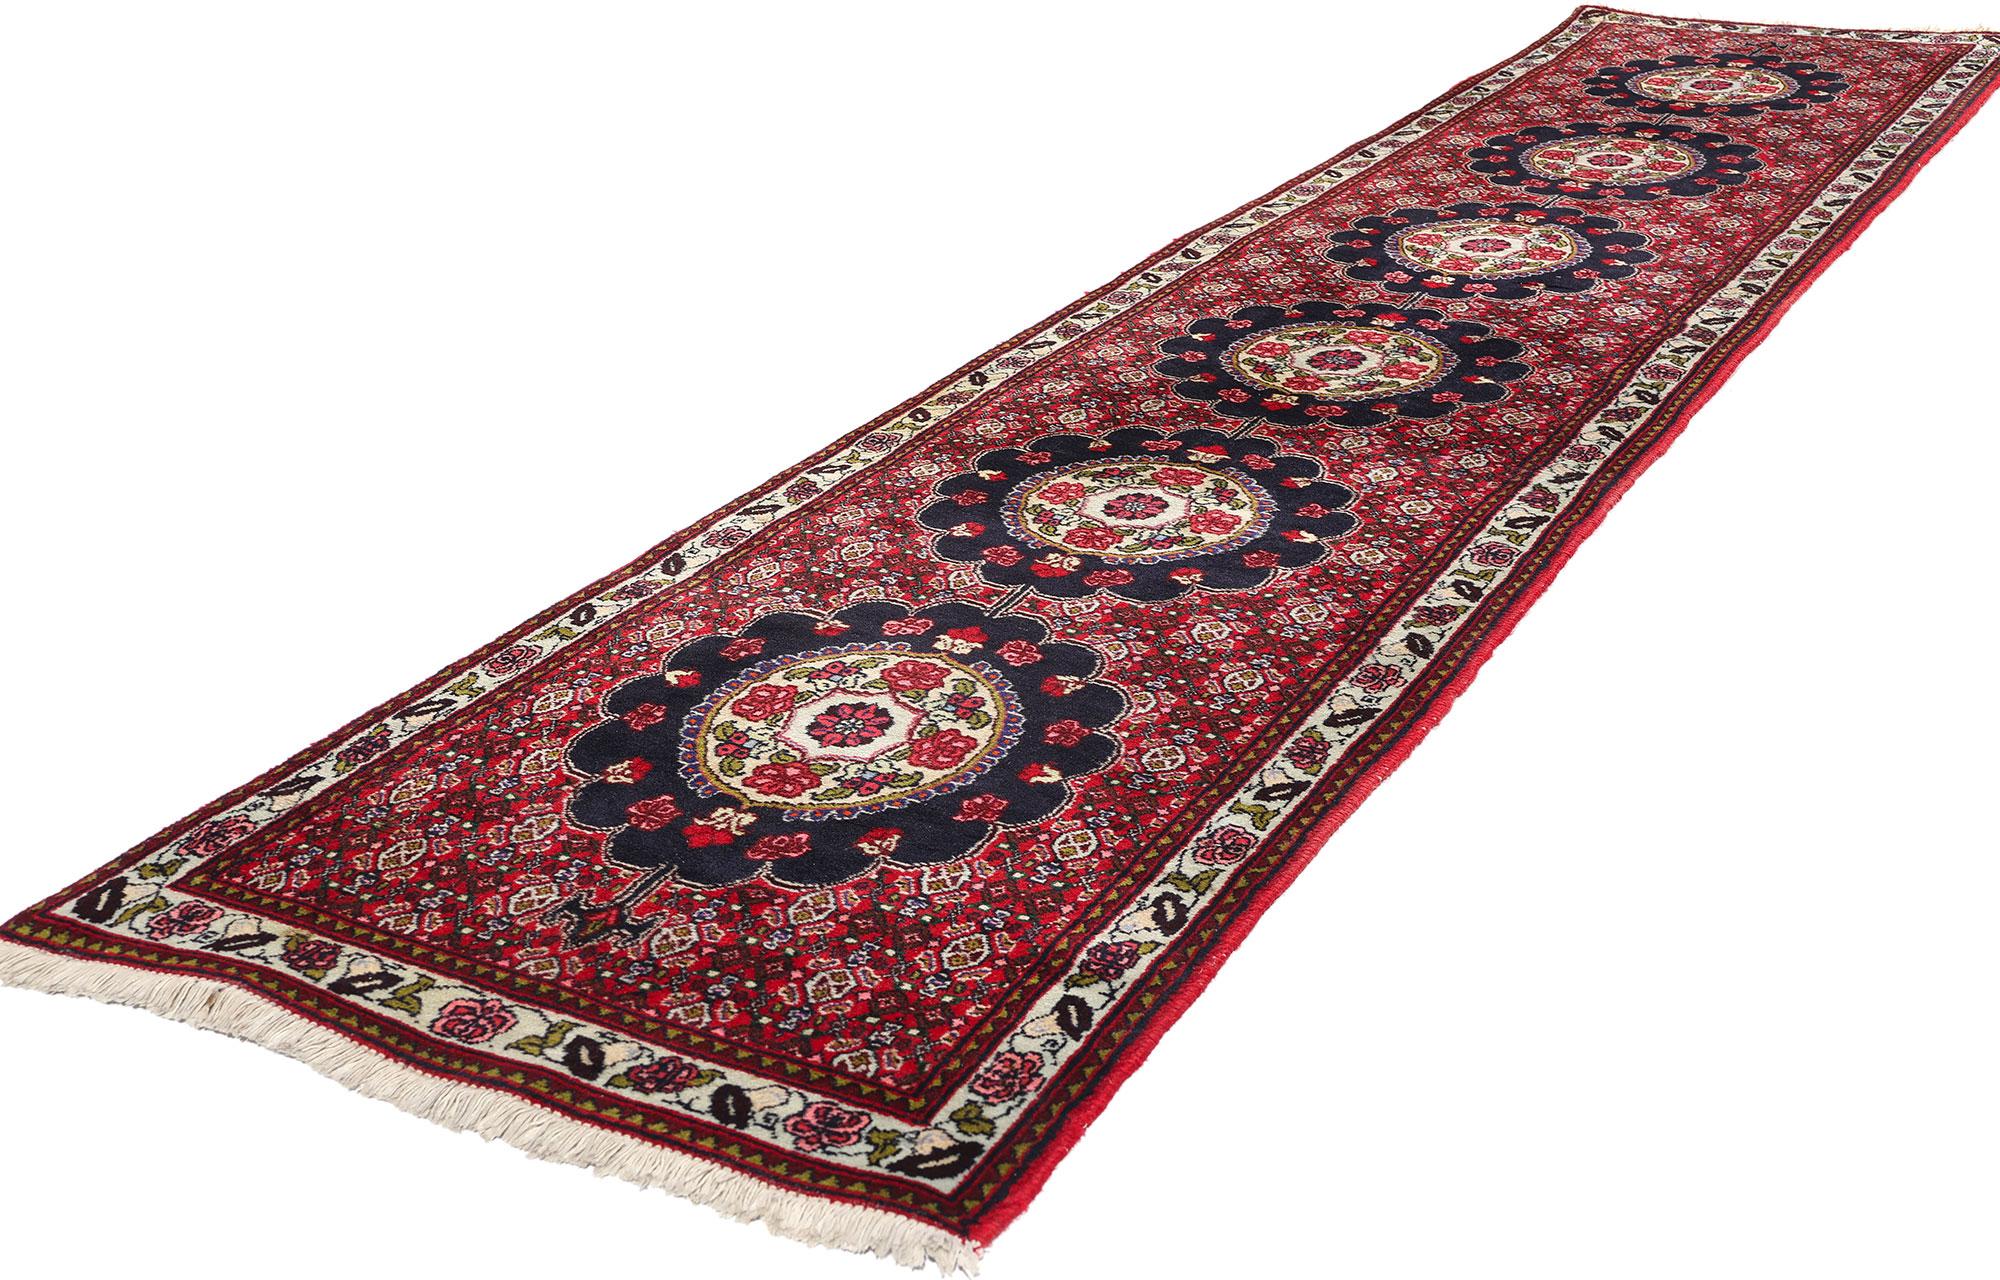 78699 Vintage Persian Bijar Rug Runner, 02'05 x 10'10. Persian Bijar carpet runners are narrow, elongated rugs originating from Bijar in western Iran, renowned for their exceptional durability and robustness. Handcrafted by skilled Kurdish artisans